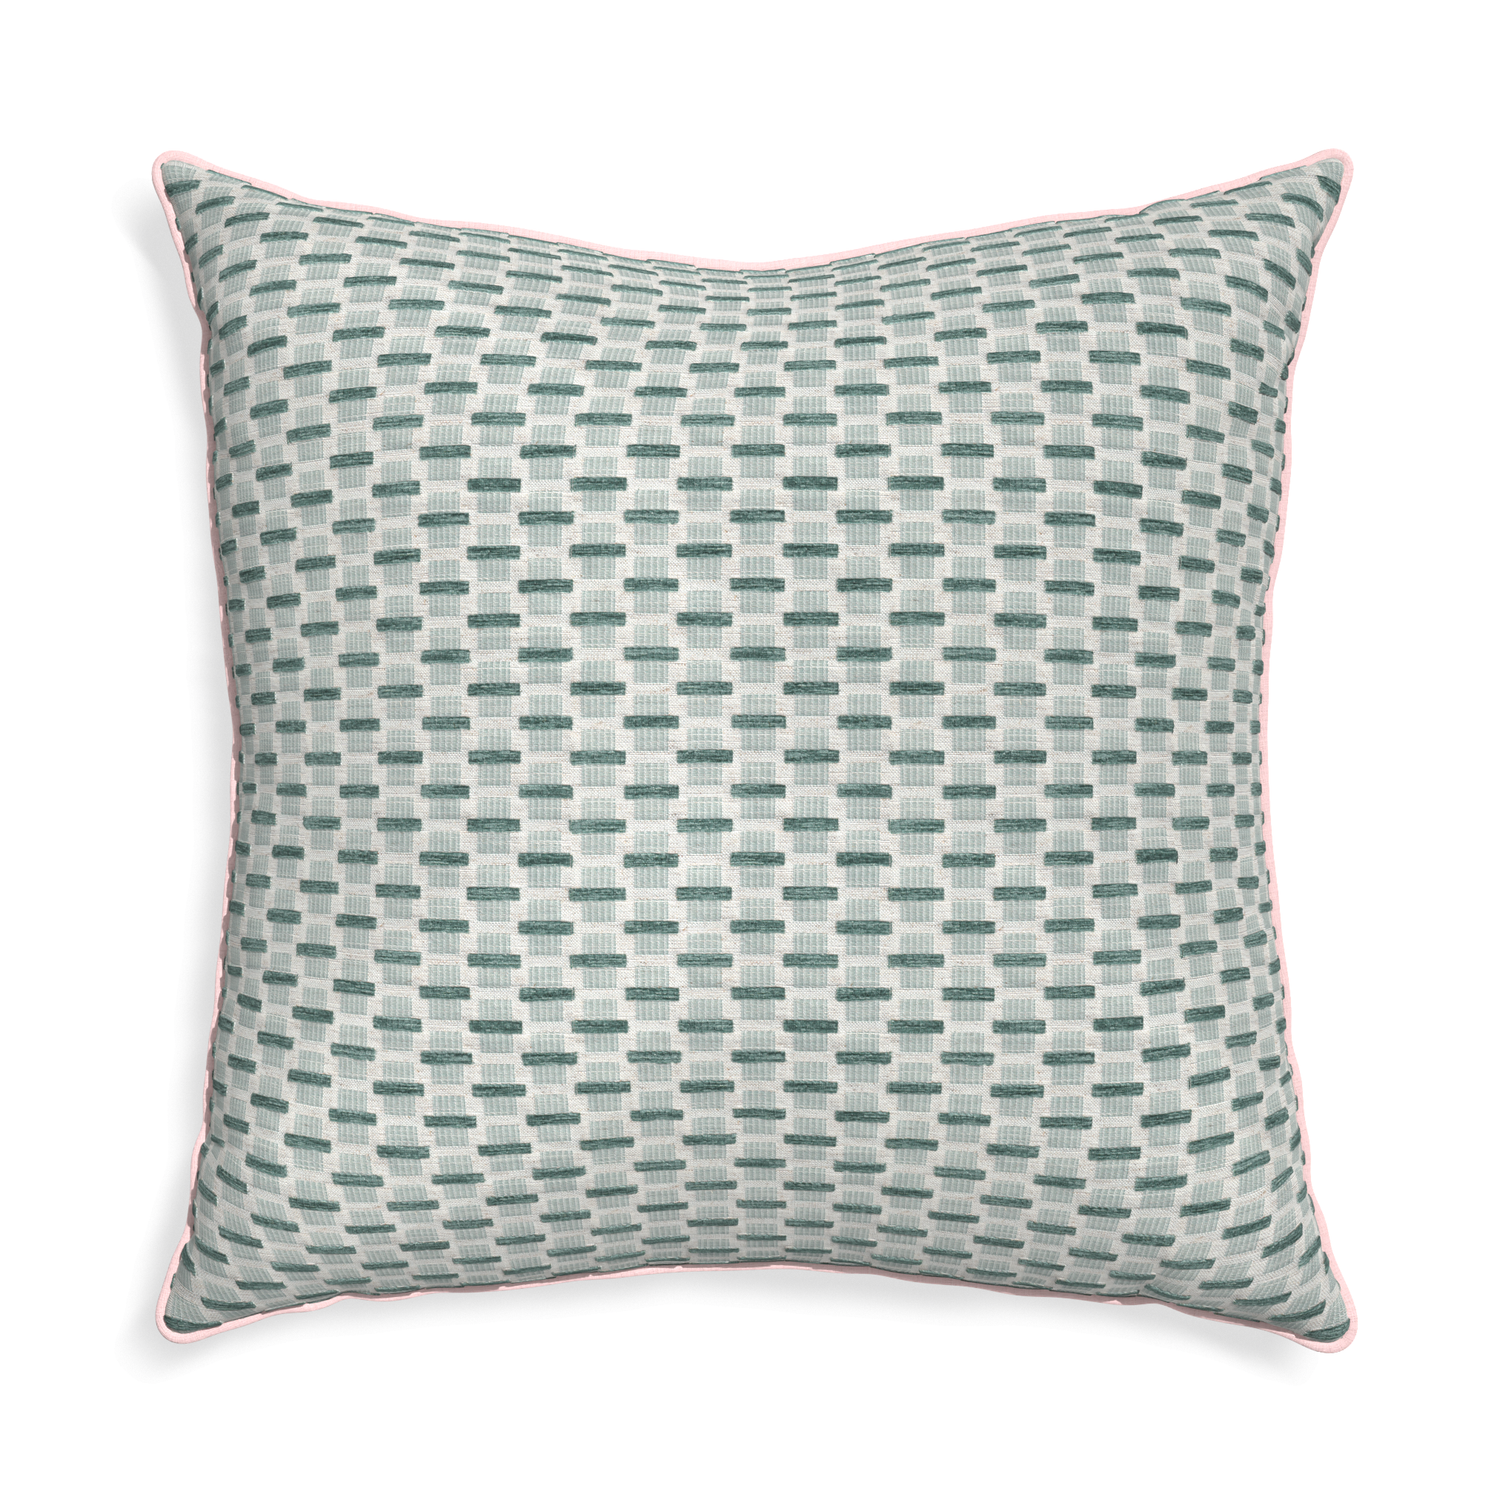 Euro-sham willow mint custom green geometric chenillepillow with petal piping on white background